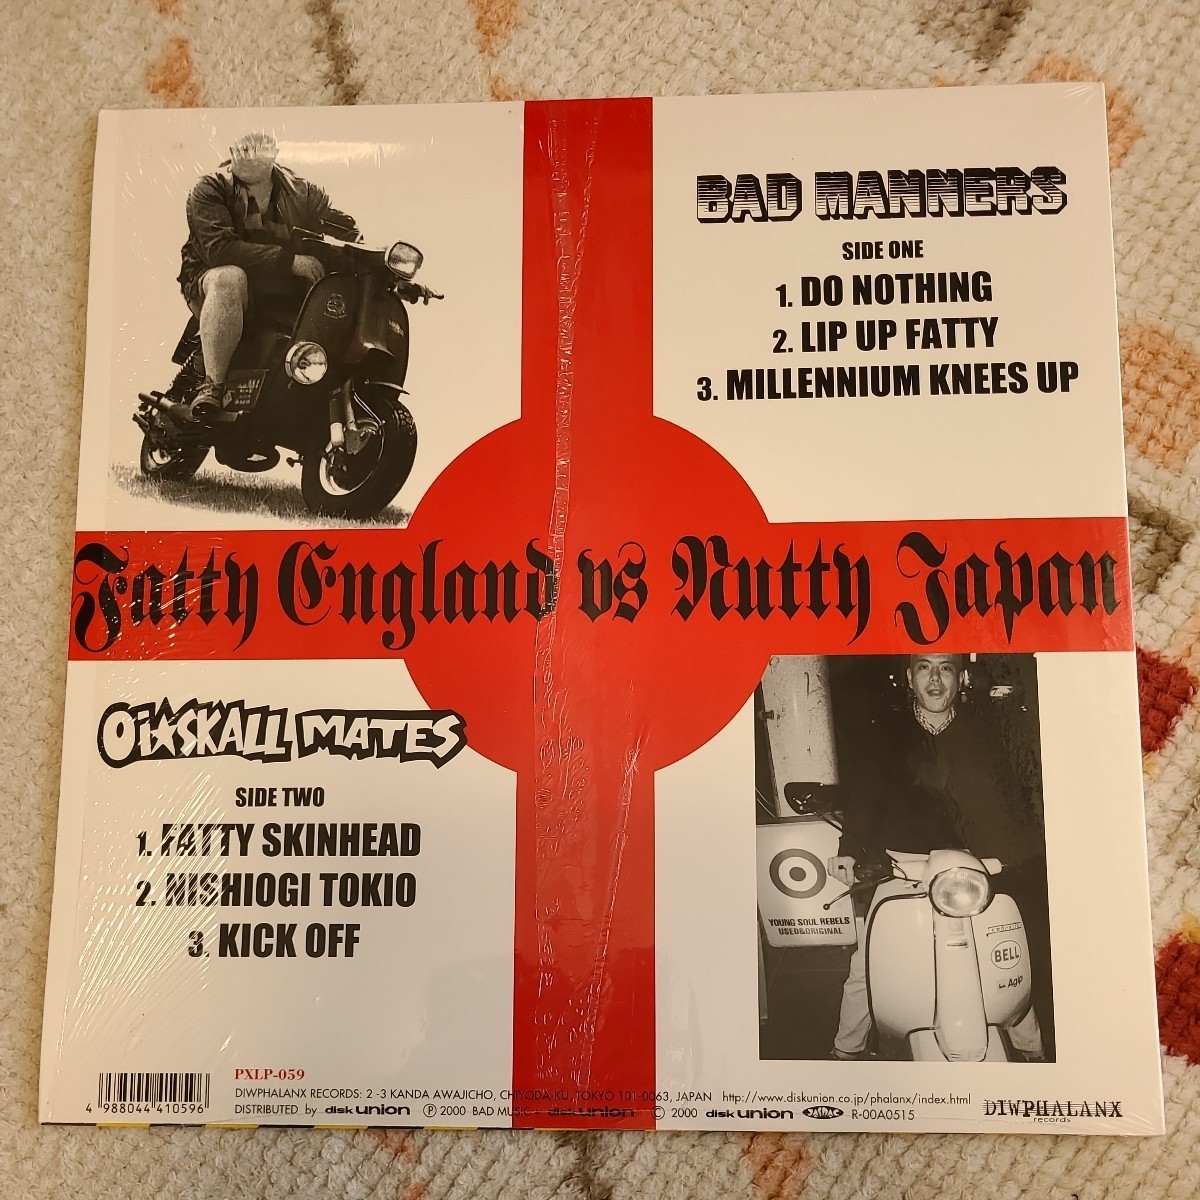 BAD MANNERS / Oi-SKALL MATES sprit『Fatty England VS Nutty Japan』の画像2